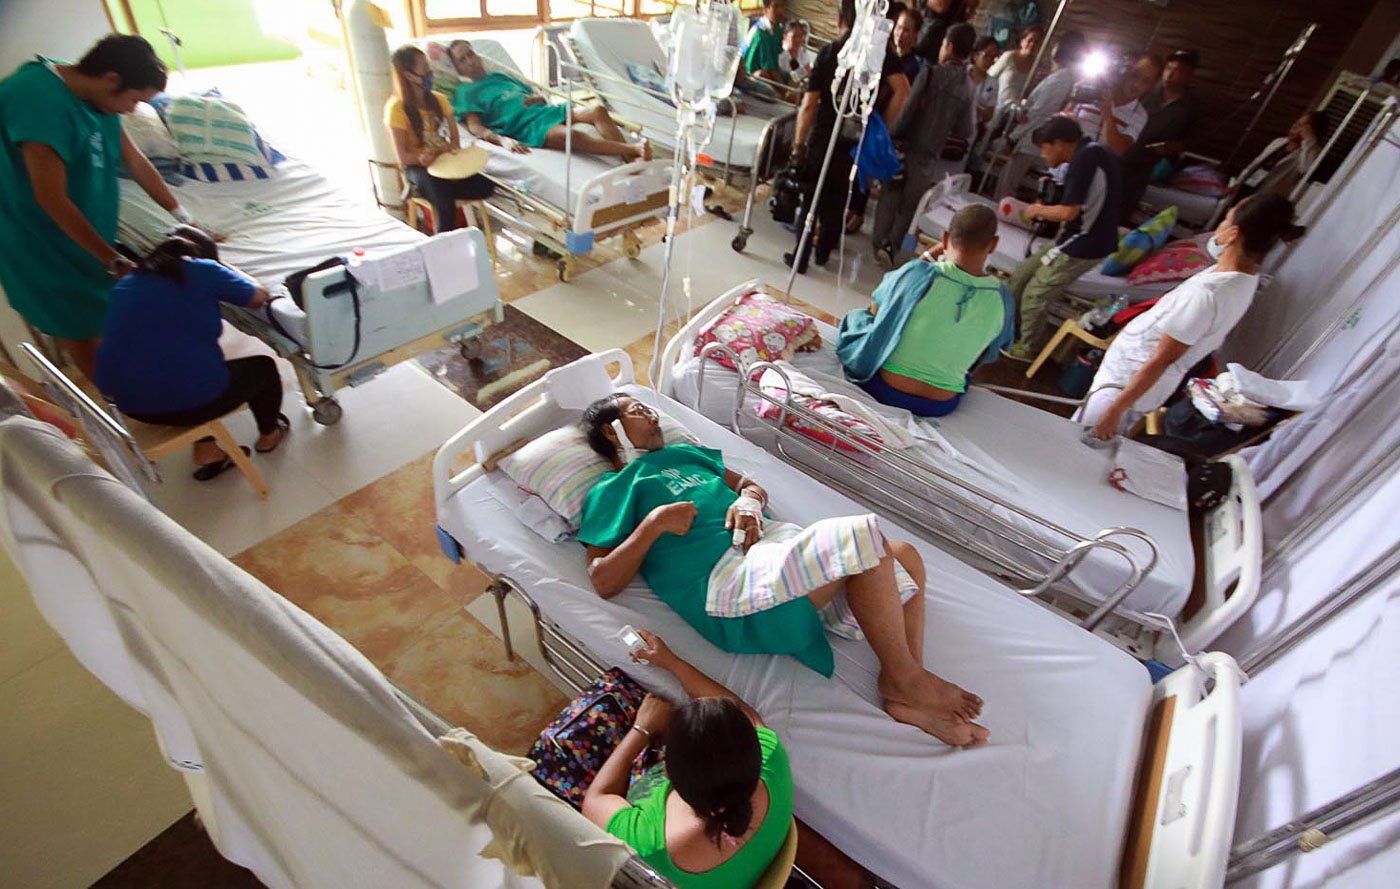 HEALTH INVESTMENT. The World Health Organization said the Philippines needs to ensure funding for universal health care. Photo by Darren Langit/Rappler  